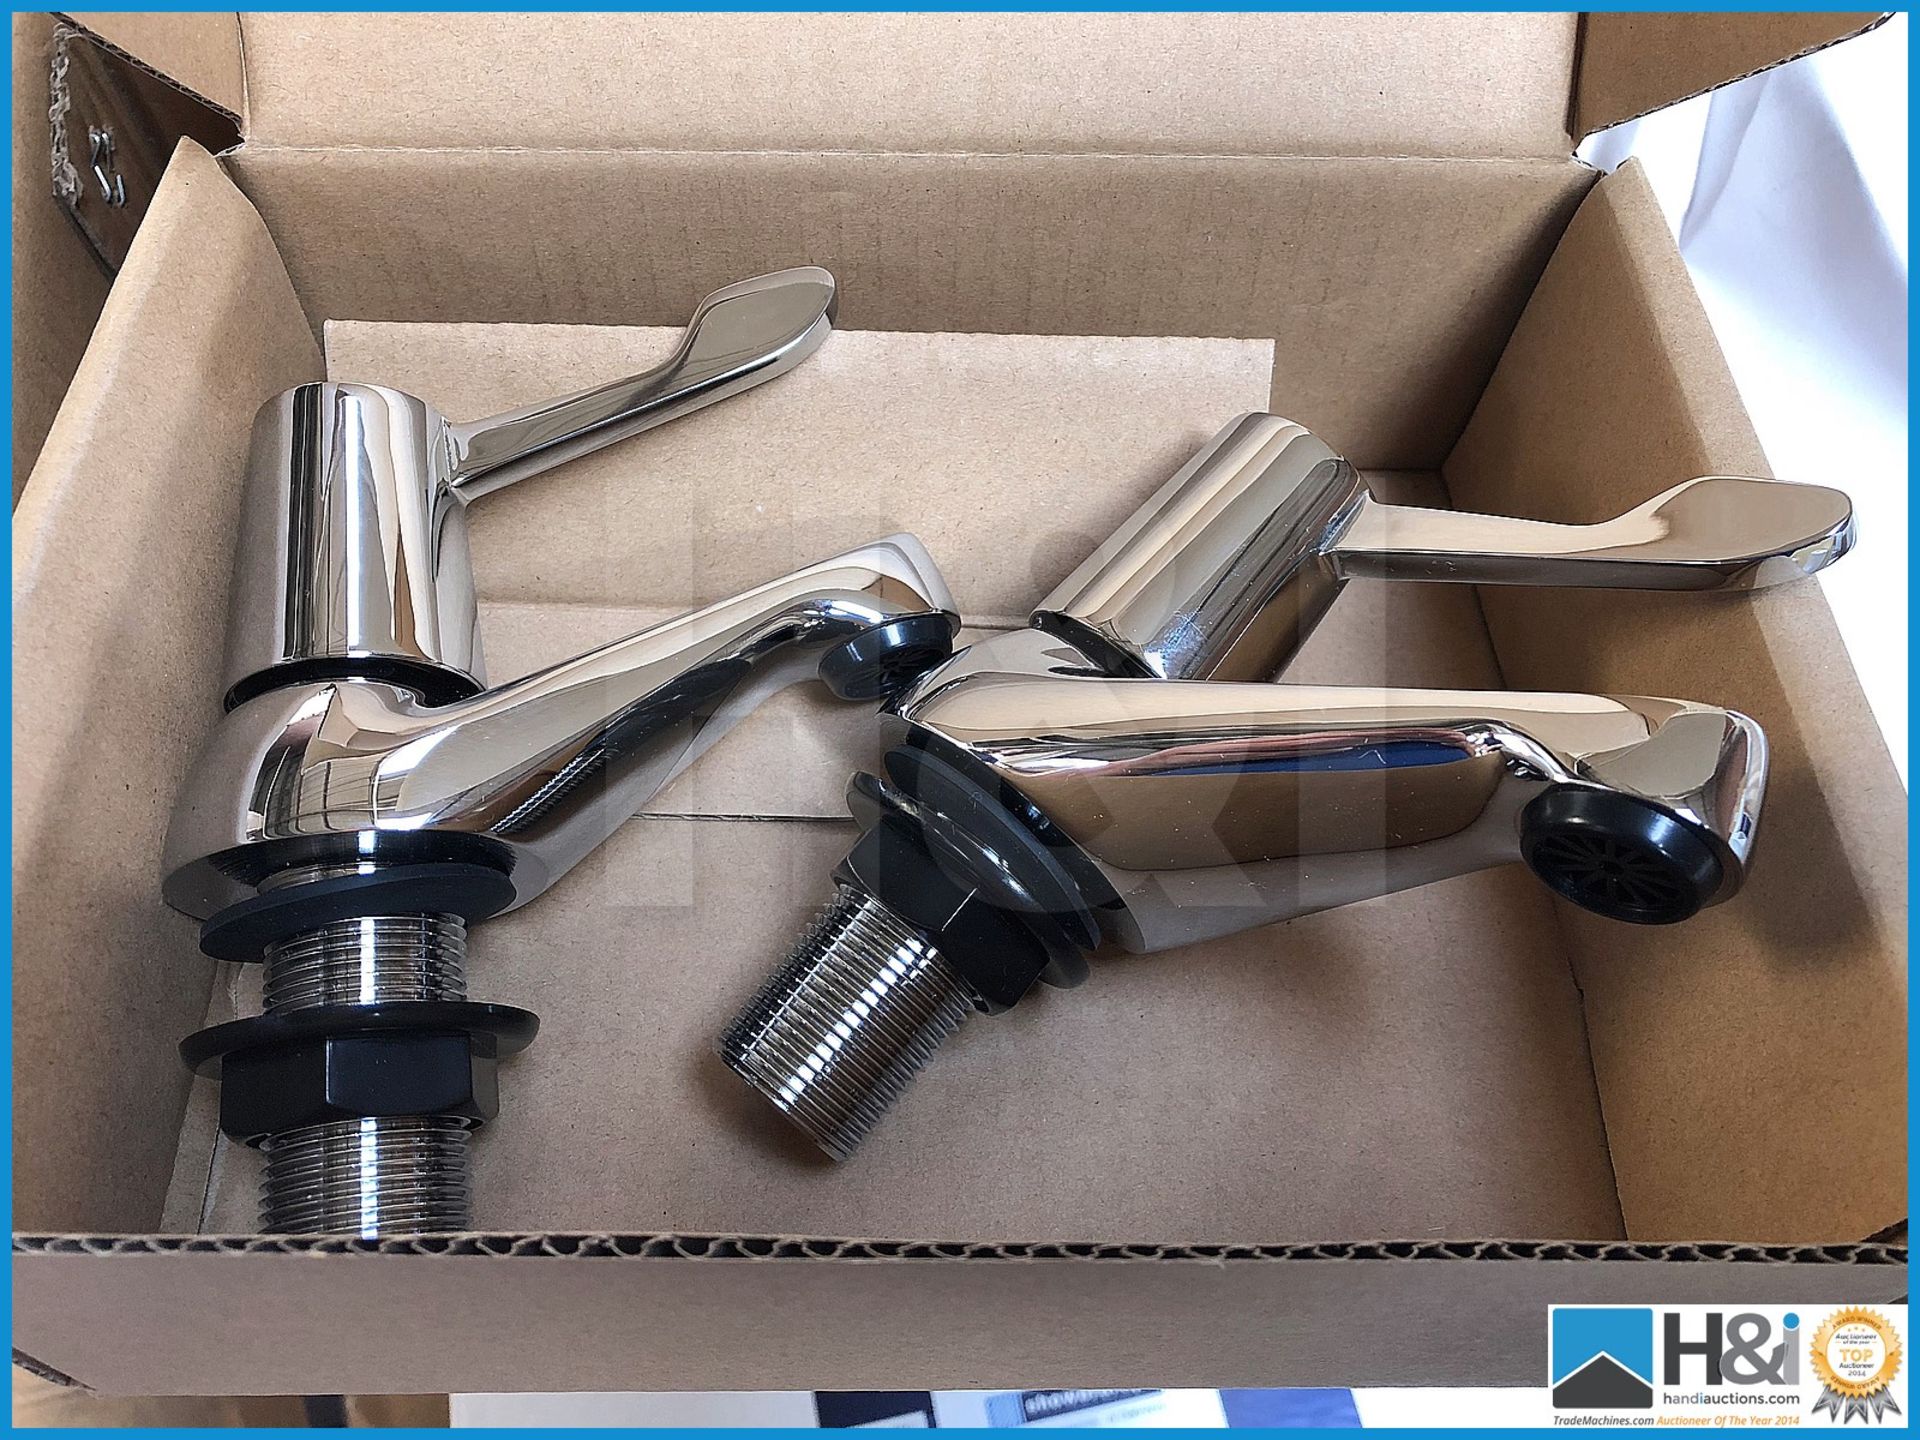 Designer polished chrome lever bath taps .New and boxed. Suggested Manufacturers Selling Price Each